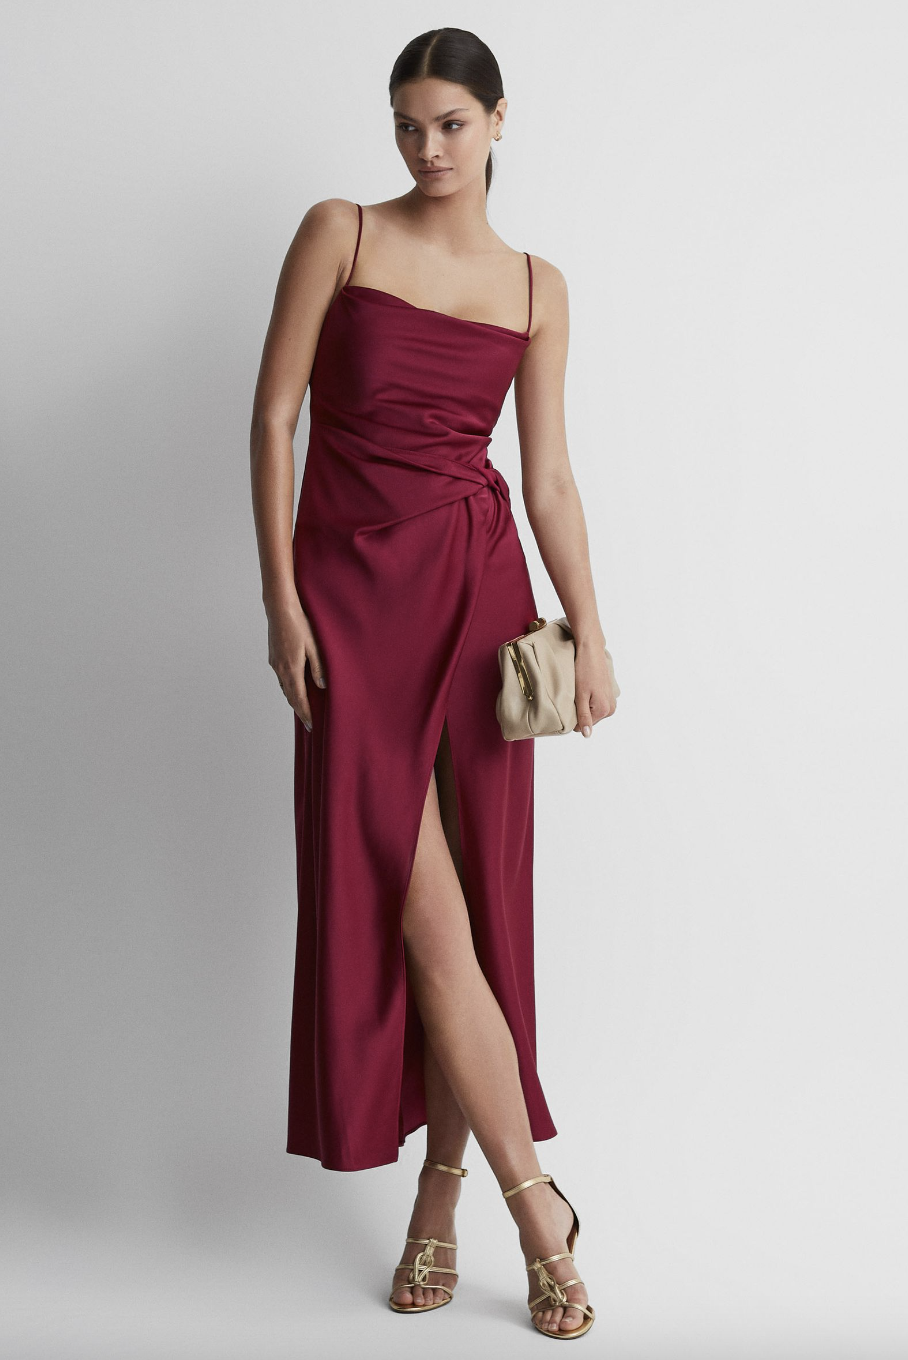 Esme significant other cowl neck satin maxi dress